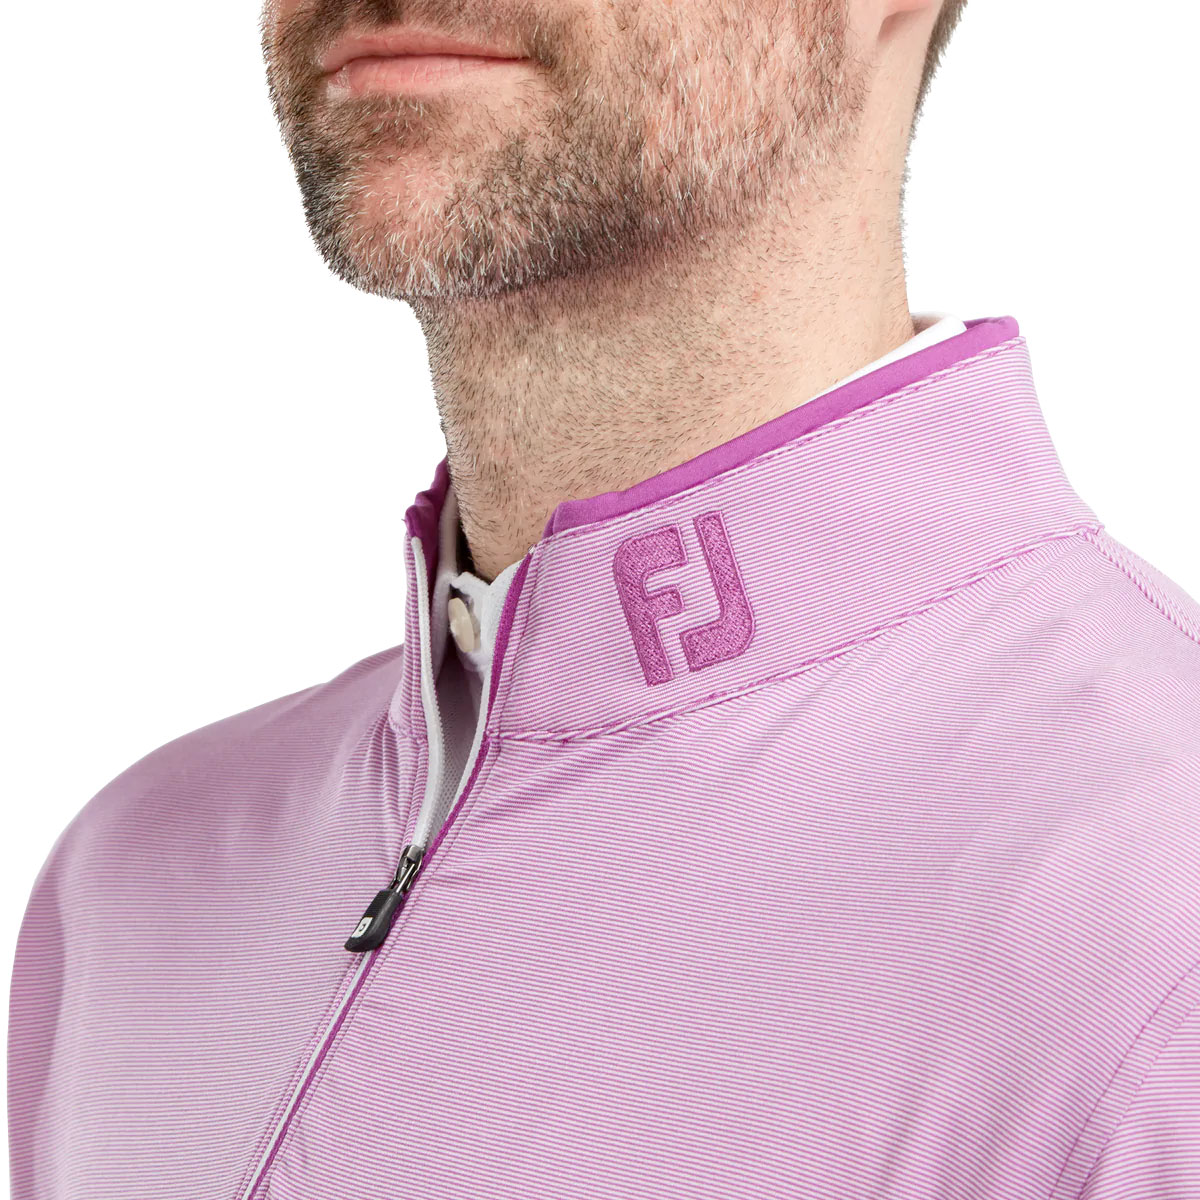 Jersey para hombre Footjoy Lightweight Microstripe Chillout